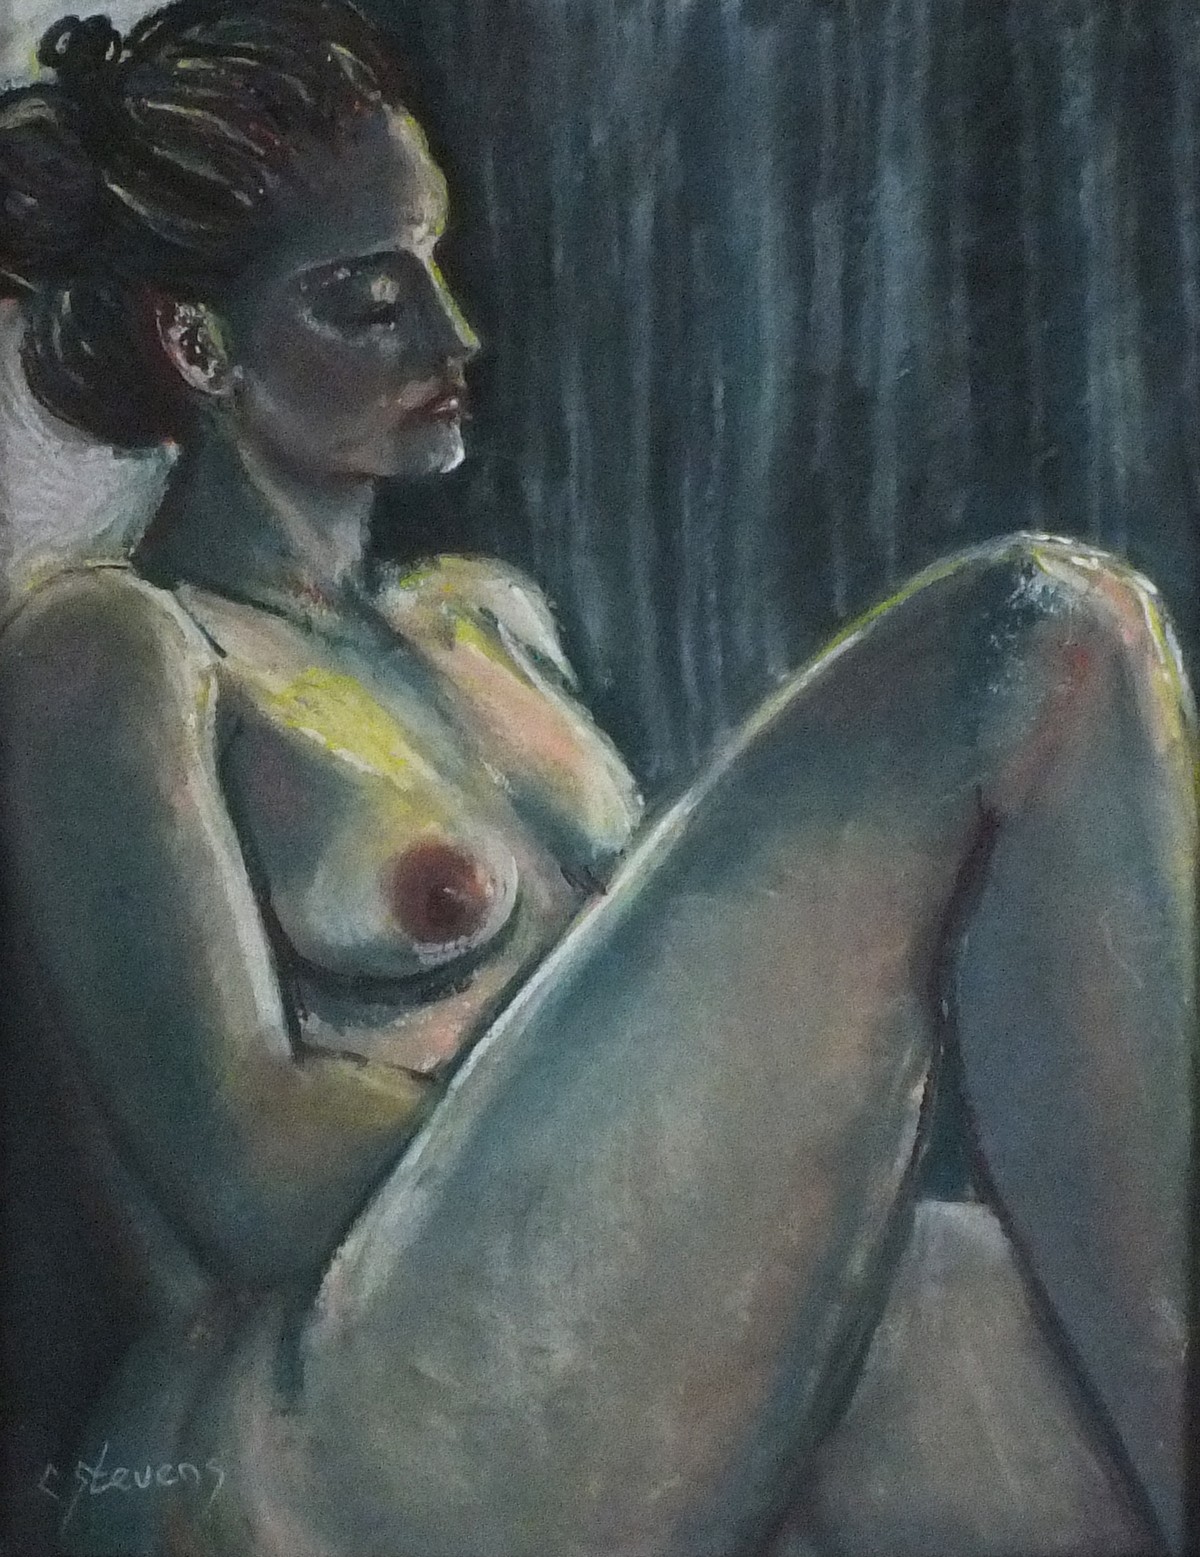 Colin STEVENS (British b. 1950) Seated Nude, Pastel on paper, Signed lower left, 15.25" x 11.25" (